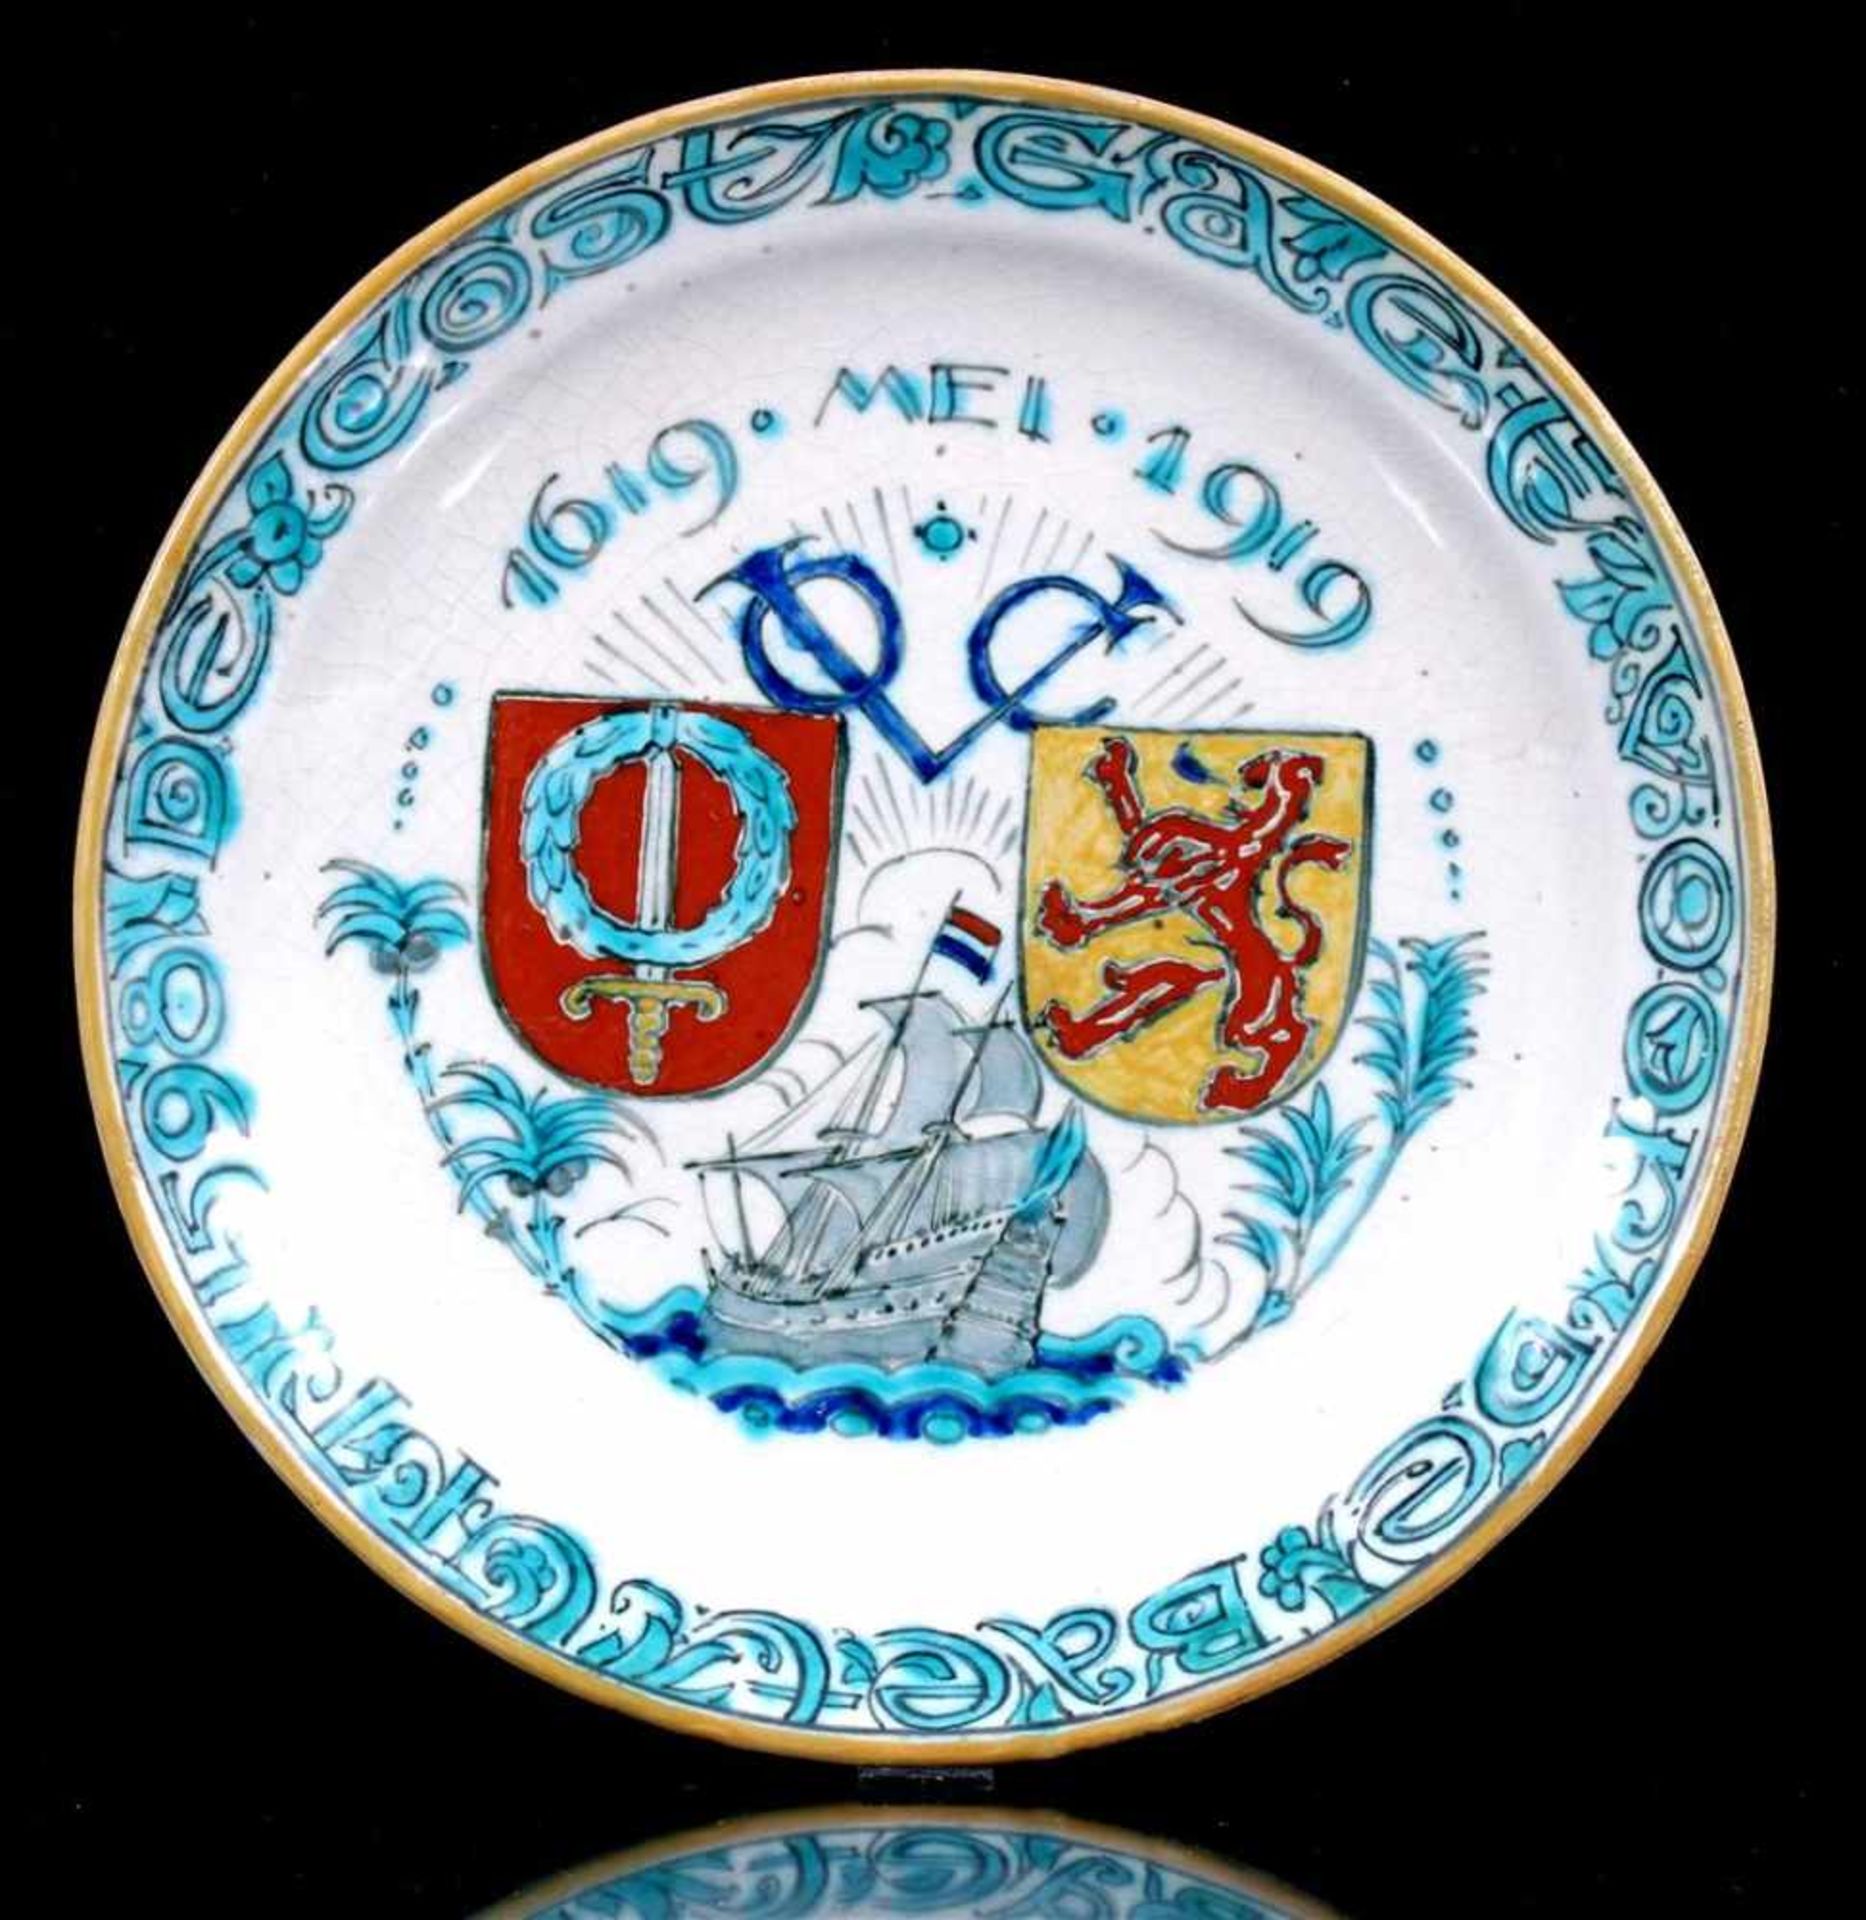 Porceleyne Fles Delft earthenware dish with image and text VOC, "the cost gaet for the baet from", &